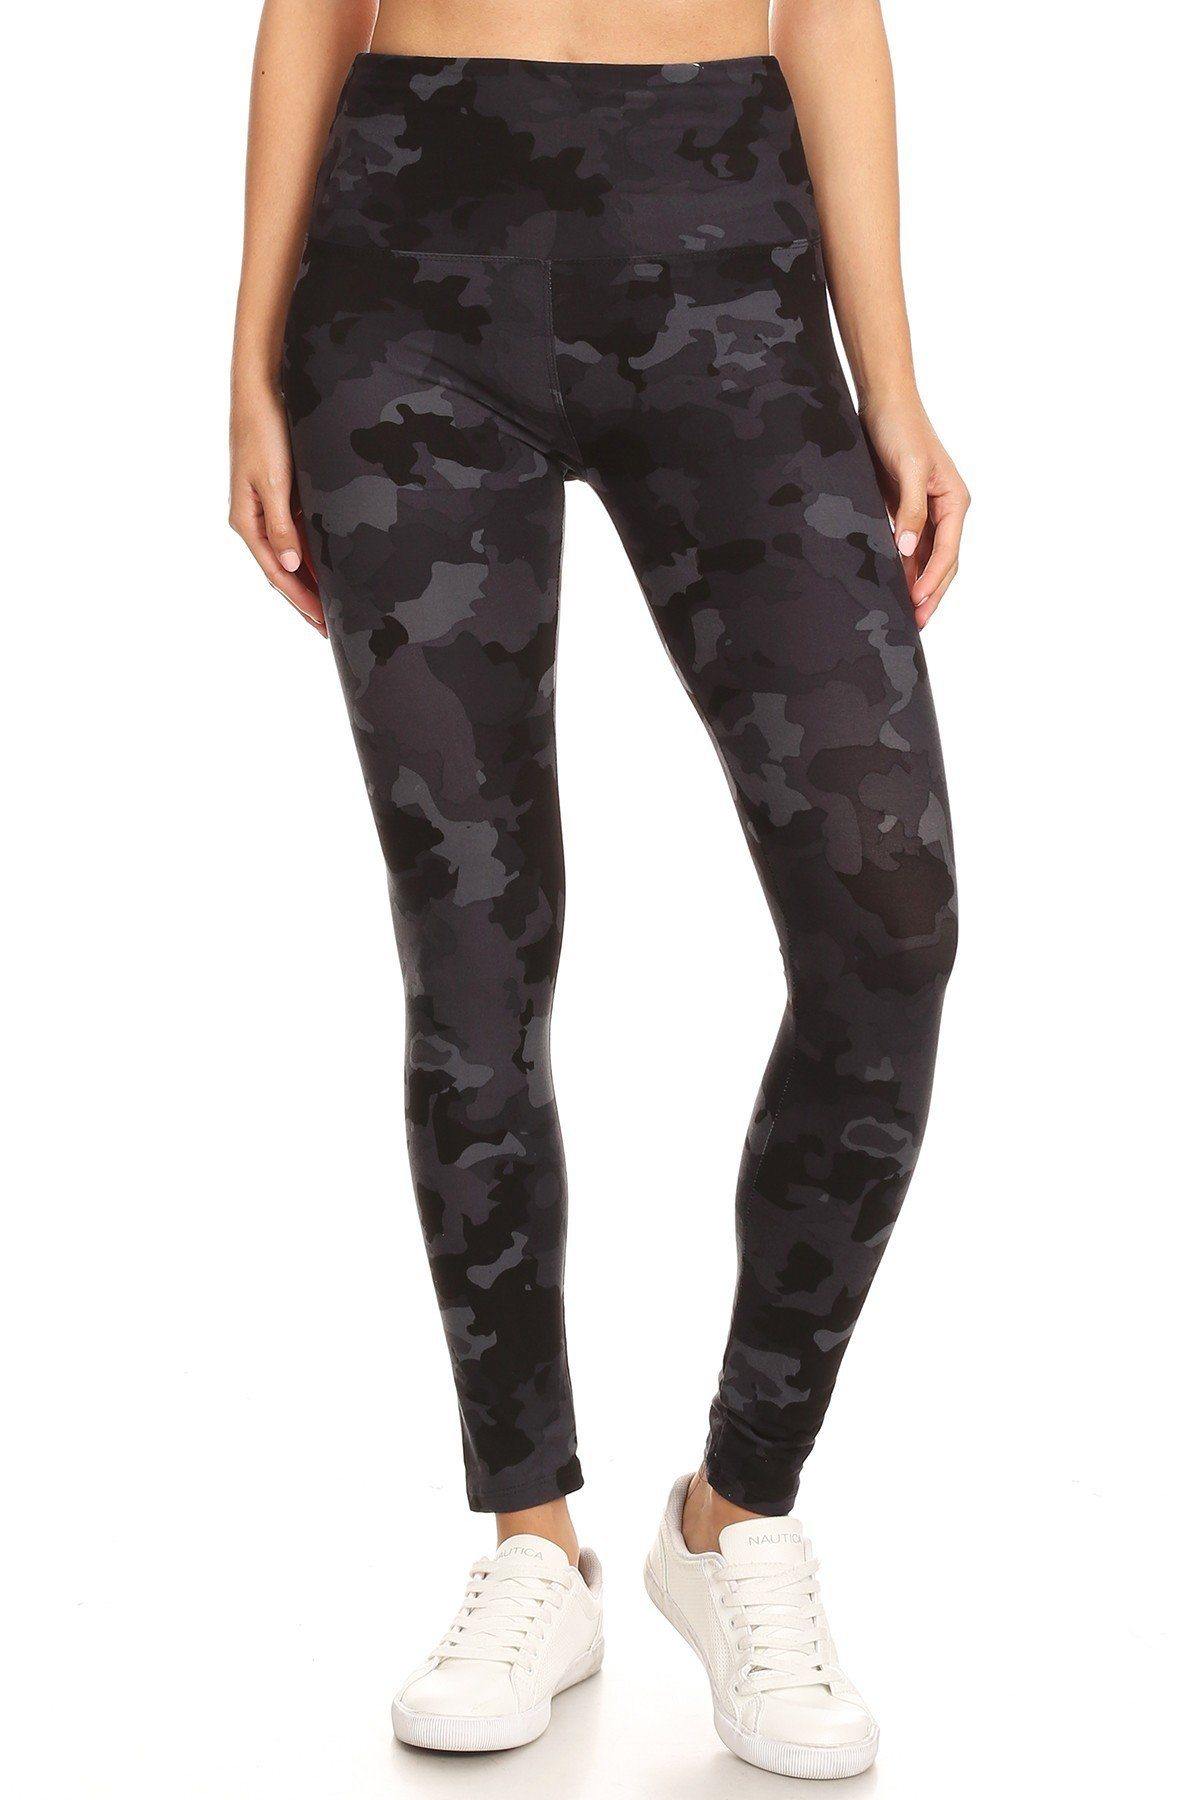 5-inch Long Yoga Style Banded Lined Camouflage Printed Knit Legging With High Waist - Pearlara